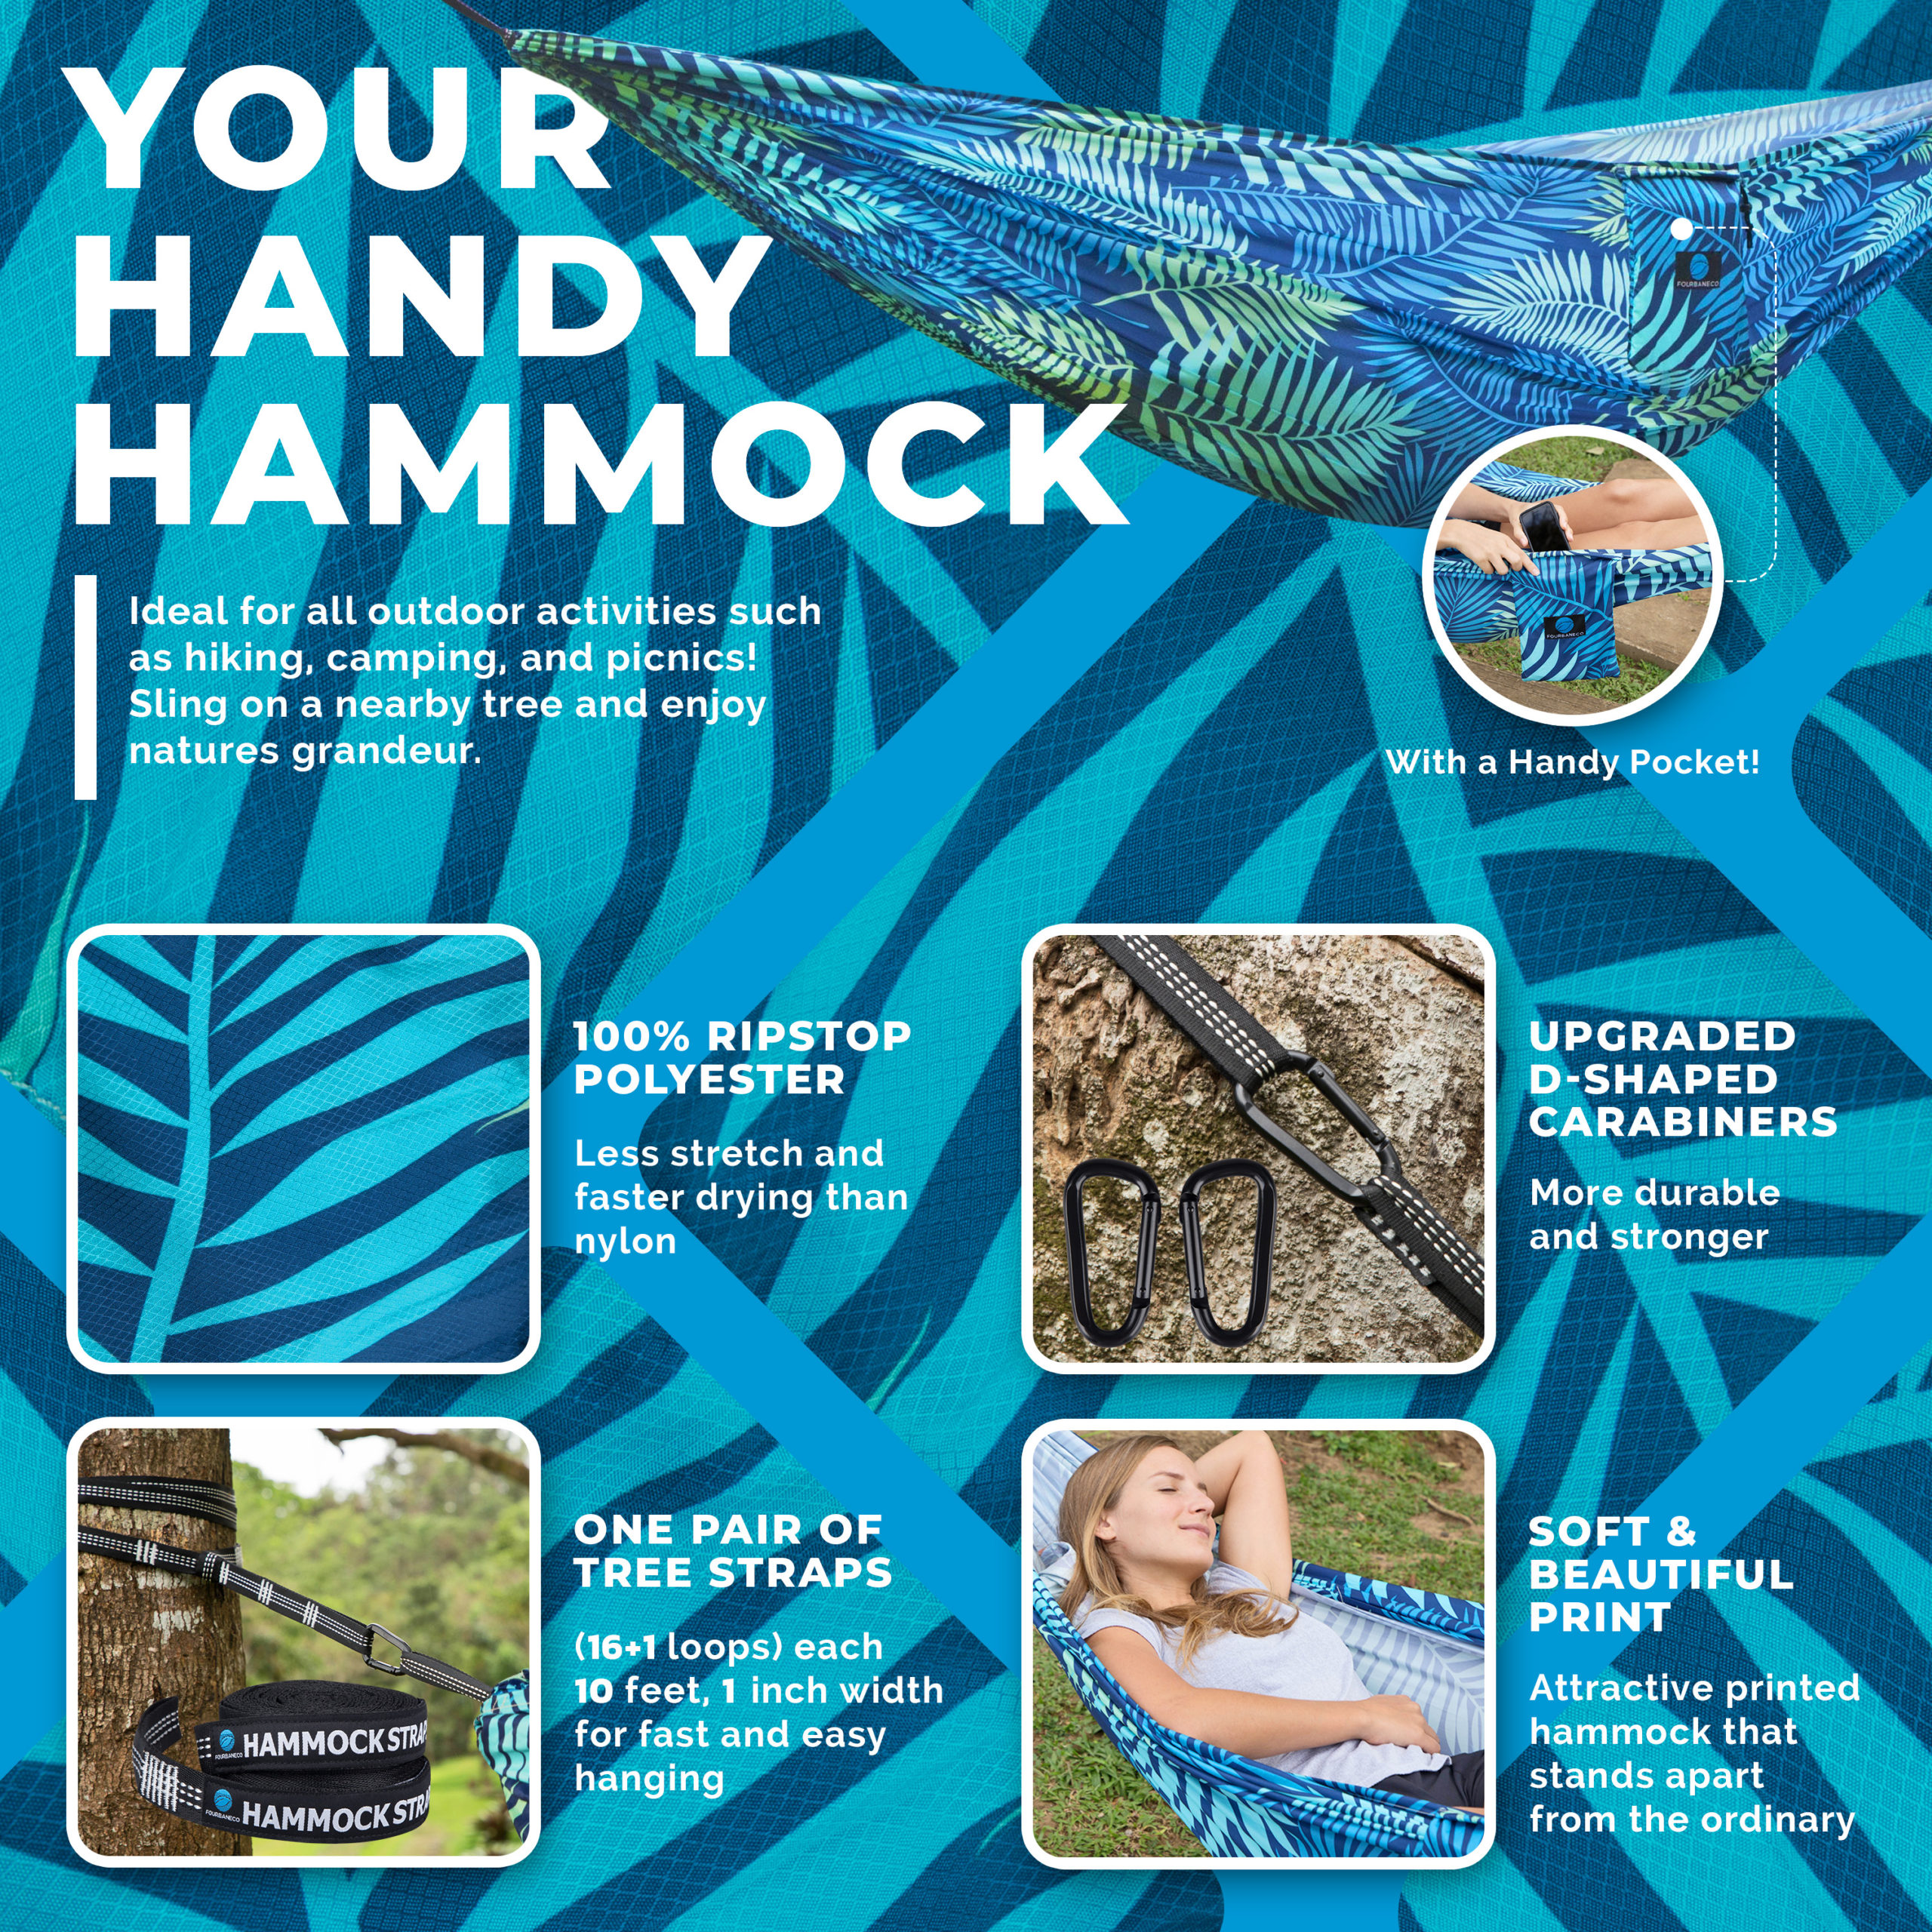 Hiking, Outdoor, Fourbaneco Porch Products Travel, Double Serene Printed Carabiners Travel Tree Straps, Indoor, Camping 2 Portable Yard Backpacking, for – UrbanEco Hammocks Lightweight Size Garden, Gear, Blue Hammock with – Beach, –